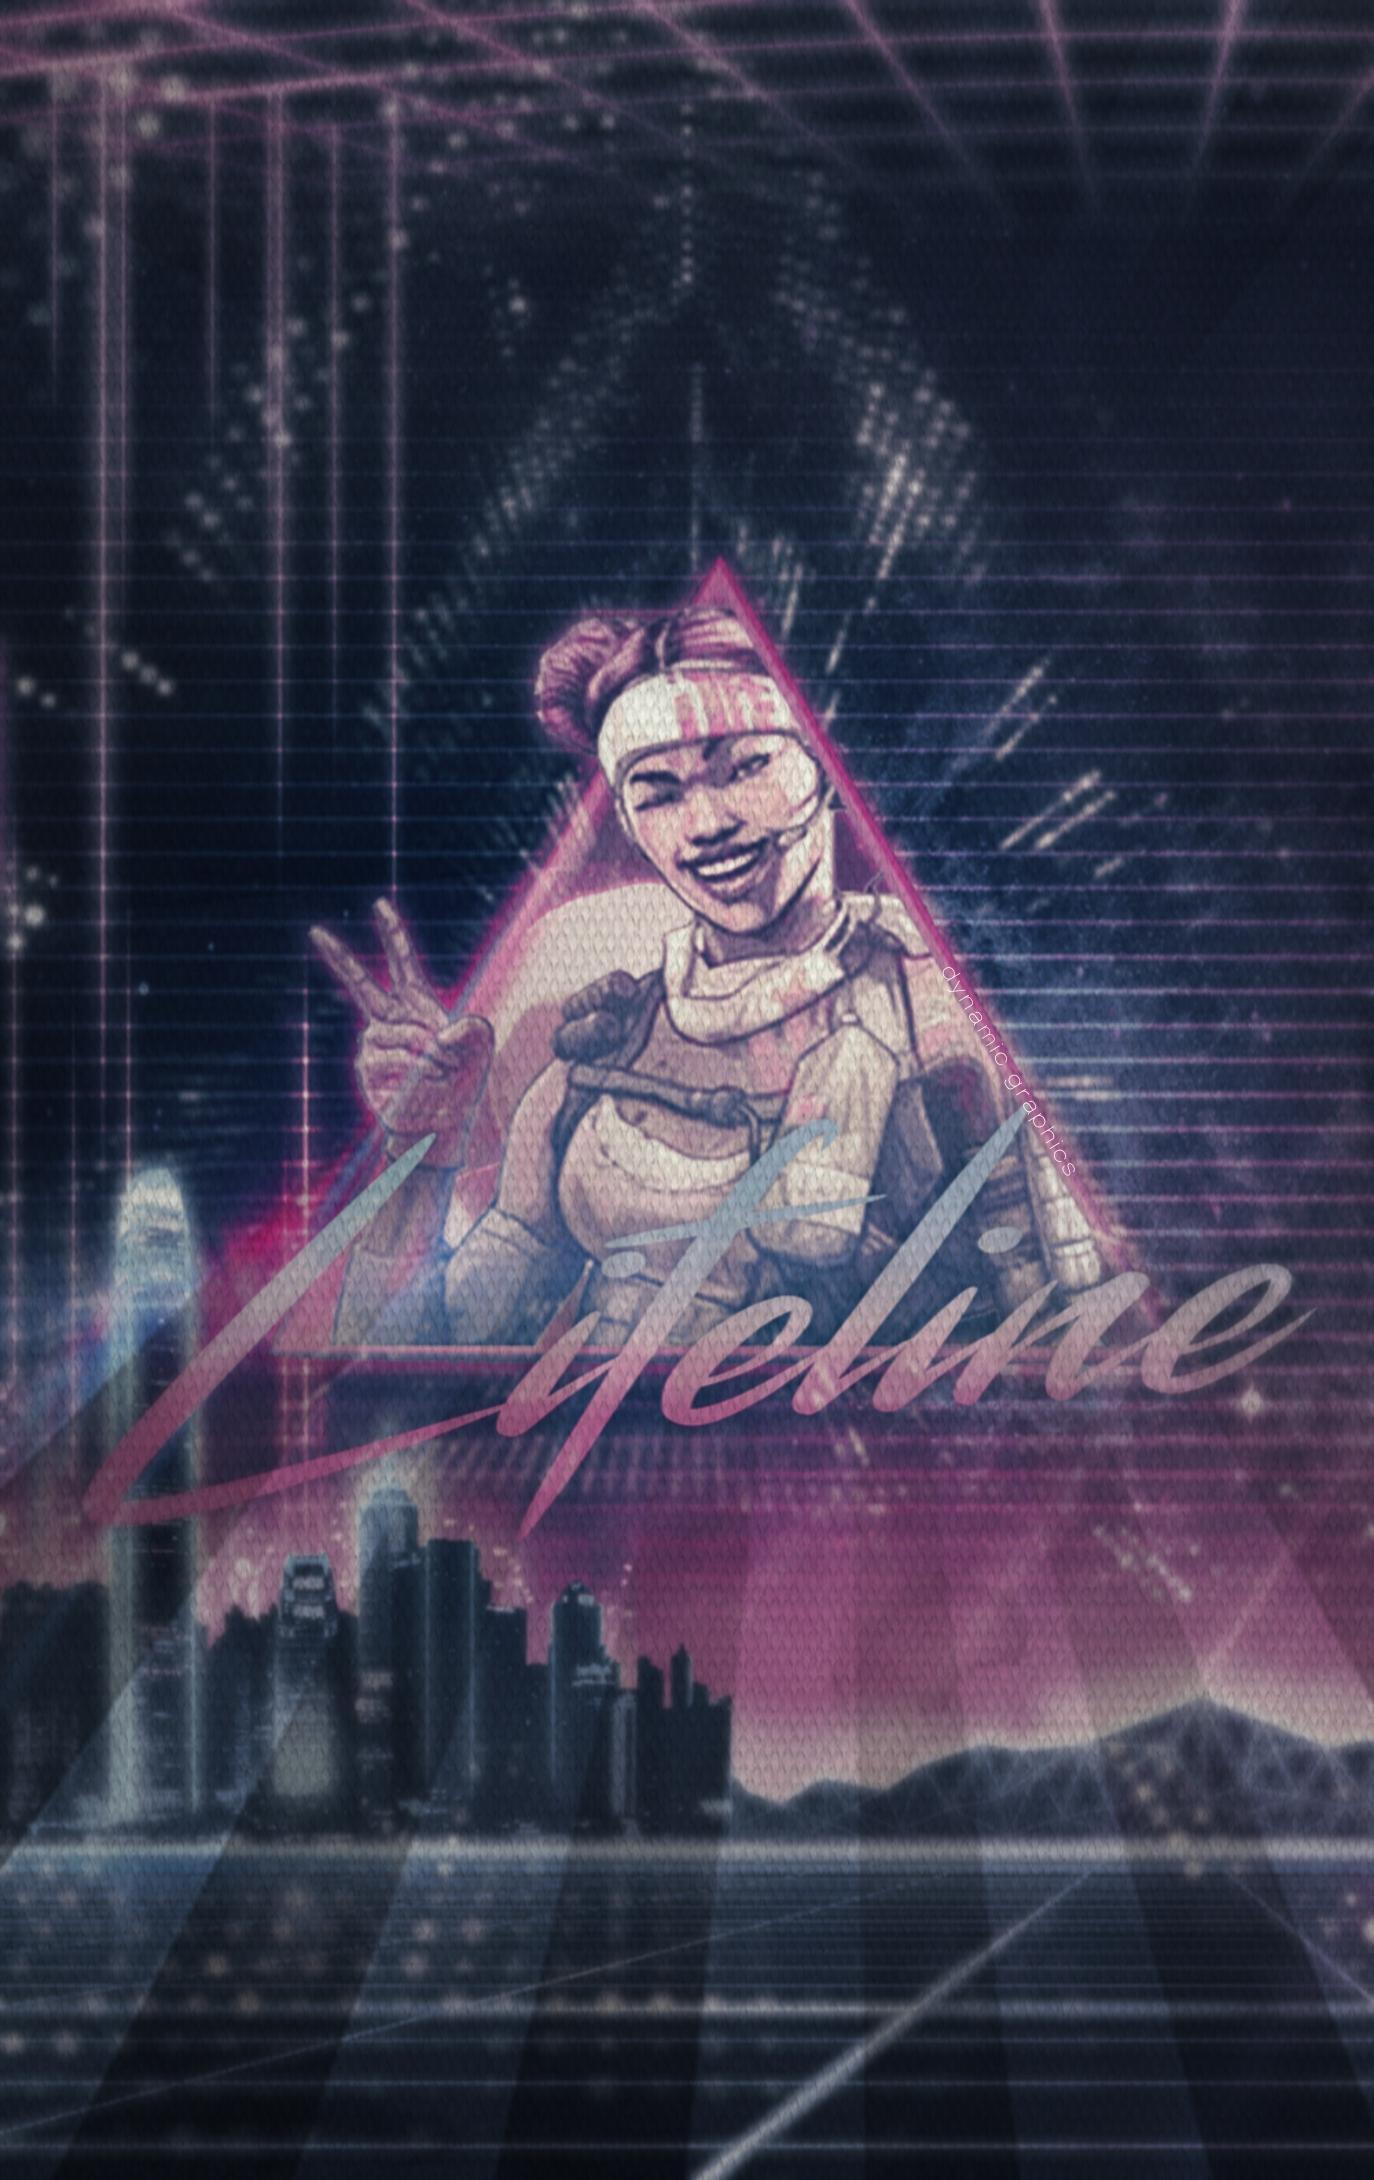 Synthwave Style Lifeline Wallpaper For Phones. Feel Free To Steal